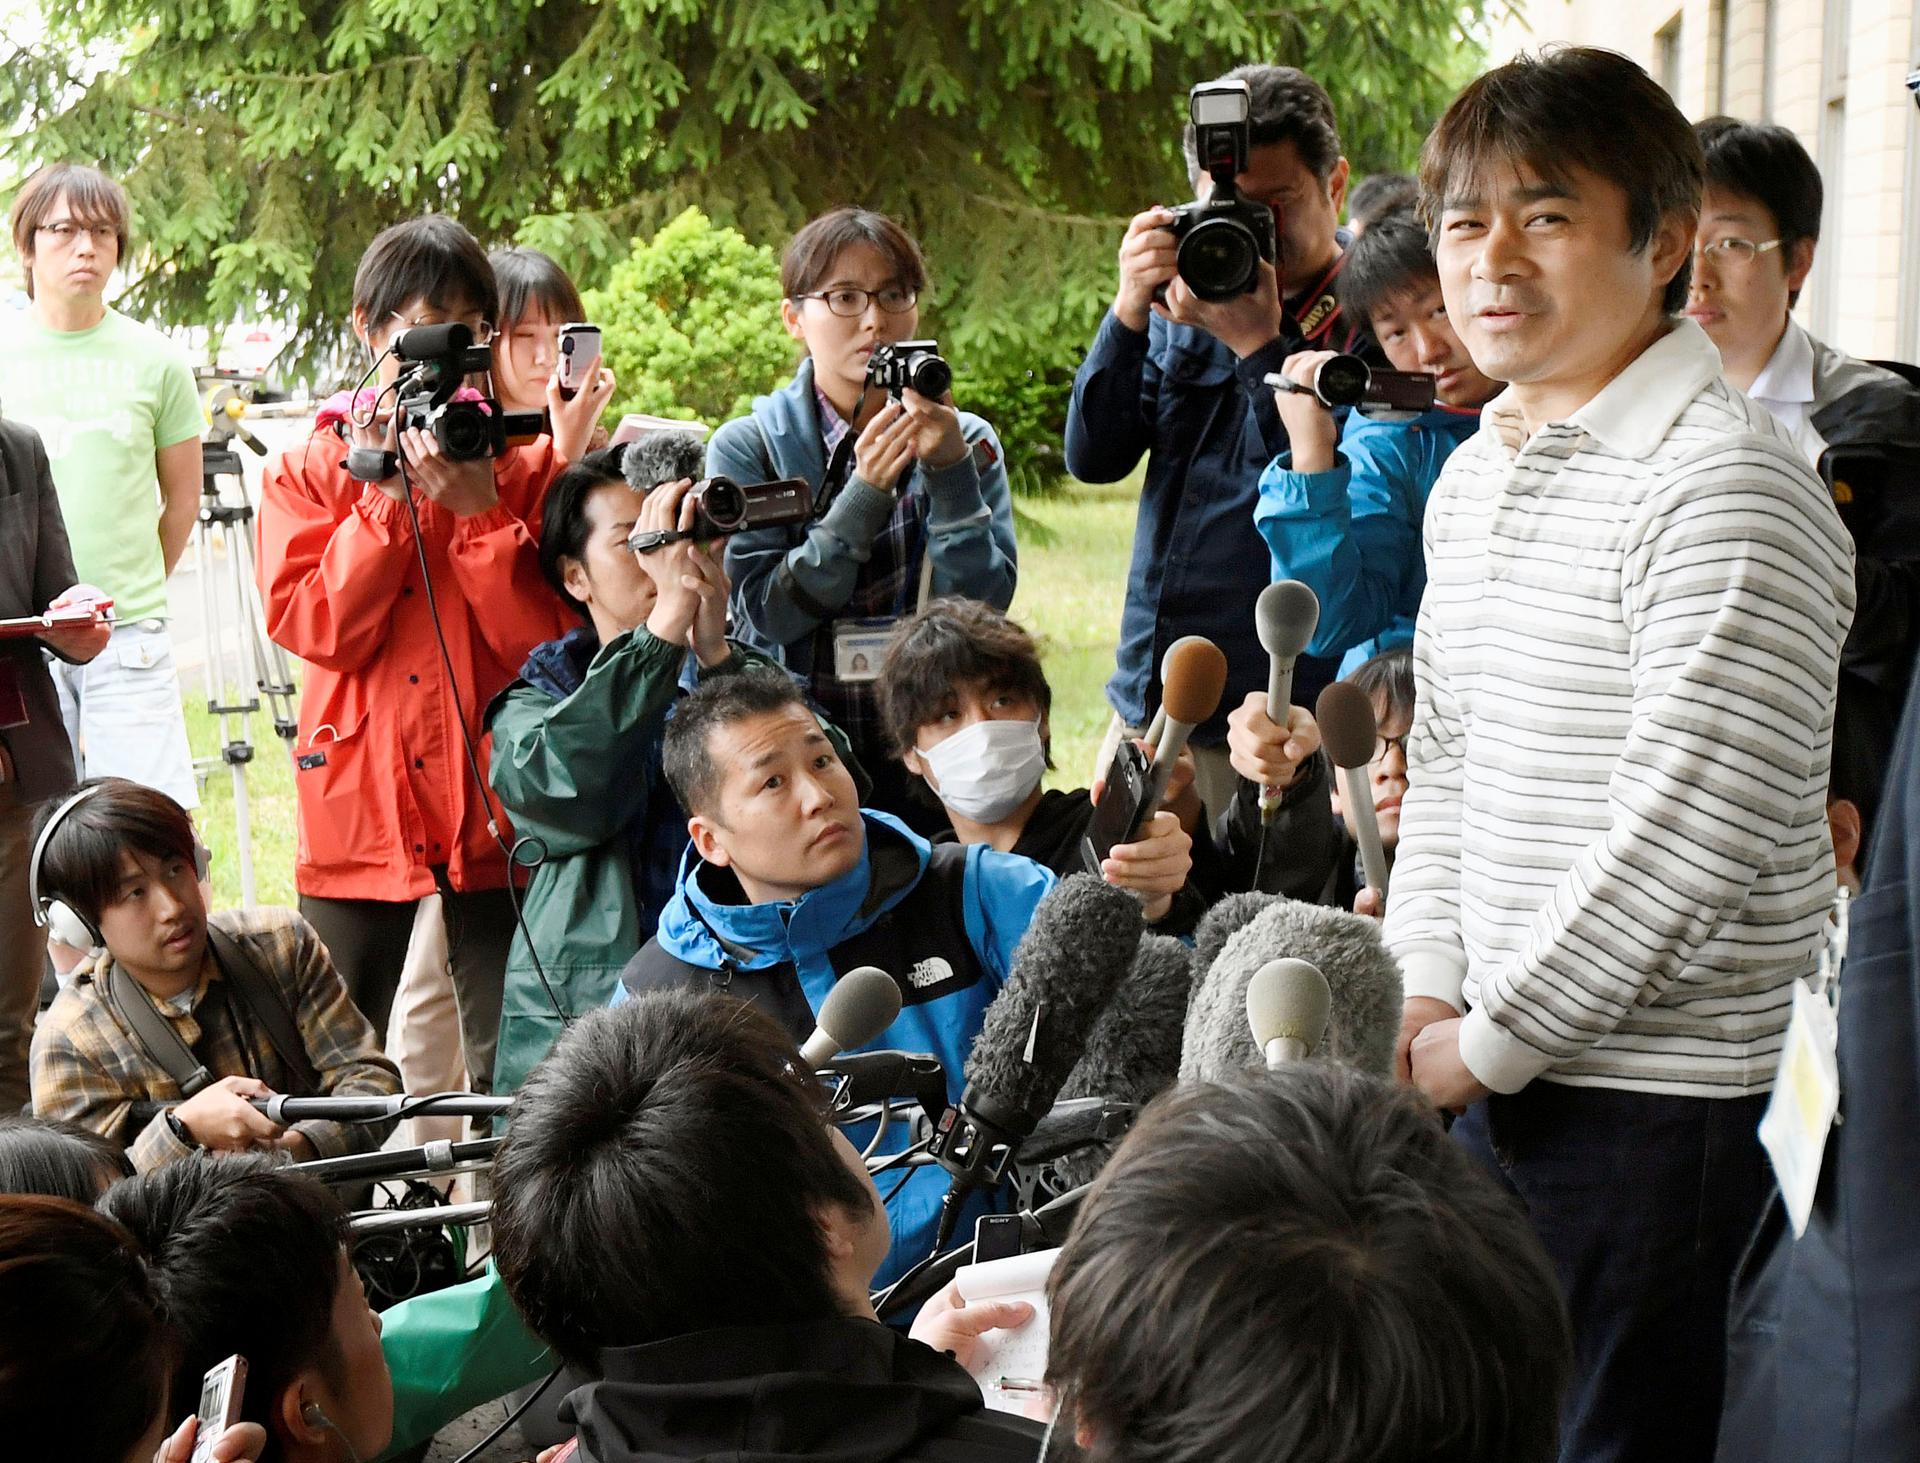 Takayuki Tanooka (R), father of 7-year-old boy Yamato Tanooka who went missing on May 28, 2016 after being left behind by his parents, was found alive, speaks to the media in Hakodate on the northernmost Japanese main island of Hokkaido, Japan, in this ph